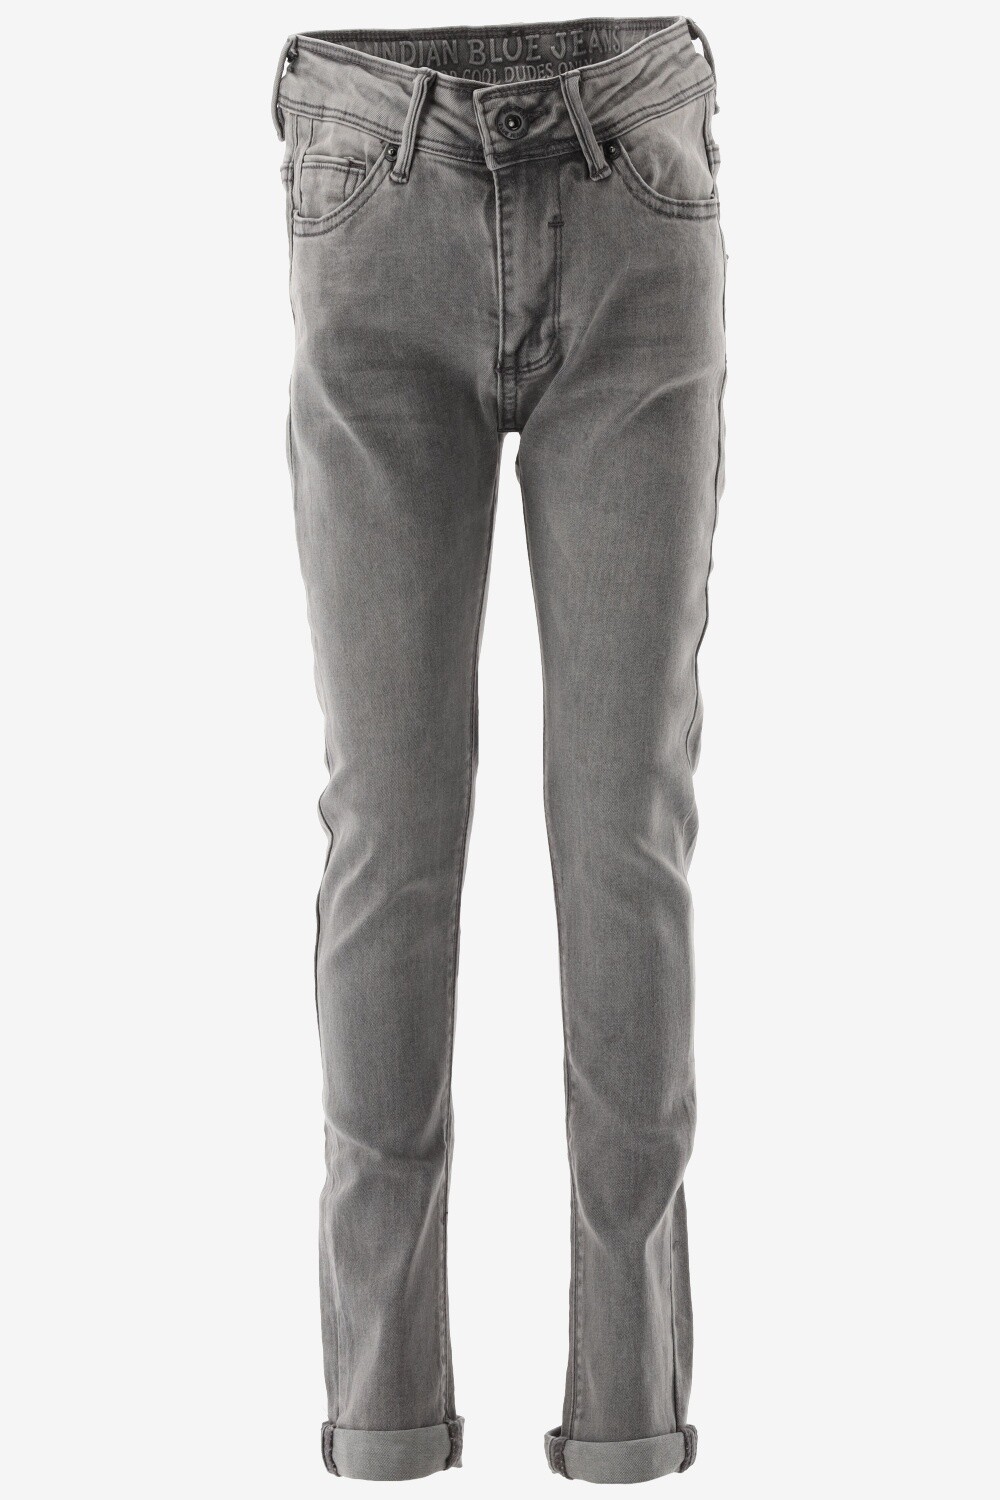 Indian Blue Jeans - JAY TAPARED Grey